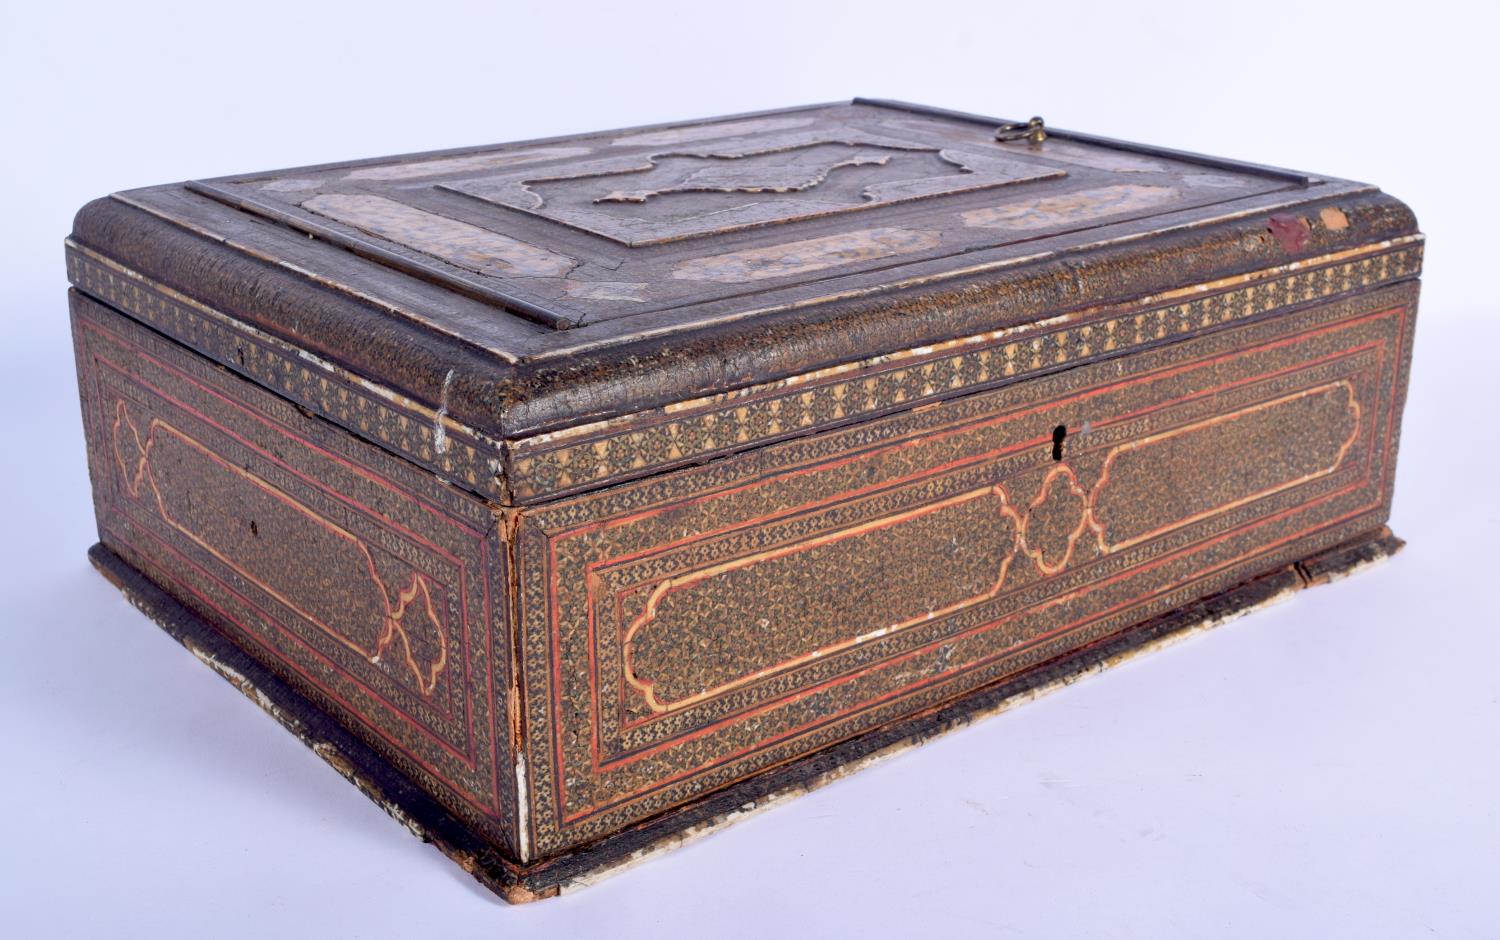 A RARE LARGE 18TH/19TH CENTURY MIDDLE EASTERN ISLAMIC MICRO MOSAIC BOX painted with Kufic script, fo